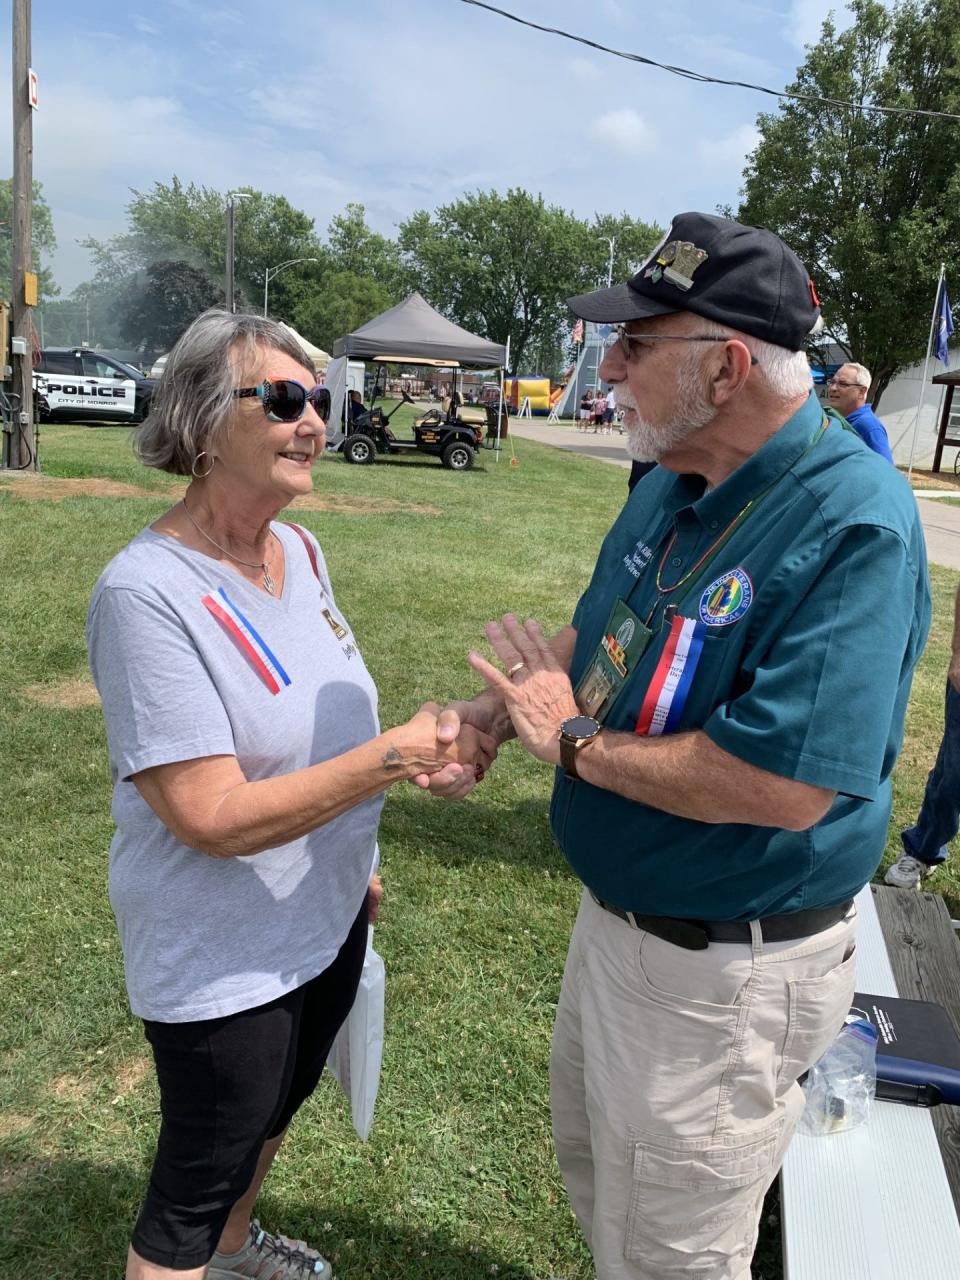 Sharon Herrera of Monroe, an Army veteran, accepts a Vietnam Veteran lapel pin from John H. Riling III, president of the Michigan State Council of the Vietnam Veterans of America and the guest speaker at the annual Veterans Day program held Monday at the Monroe County Fair.